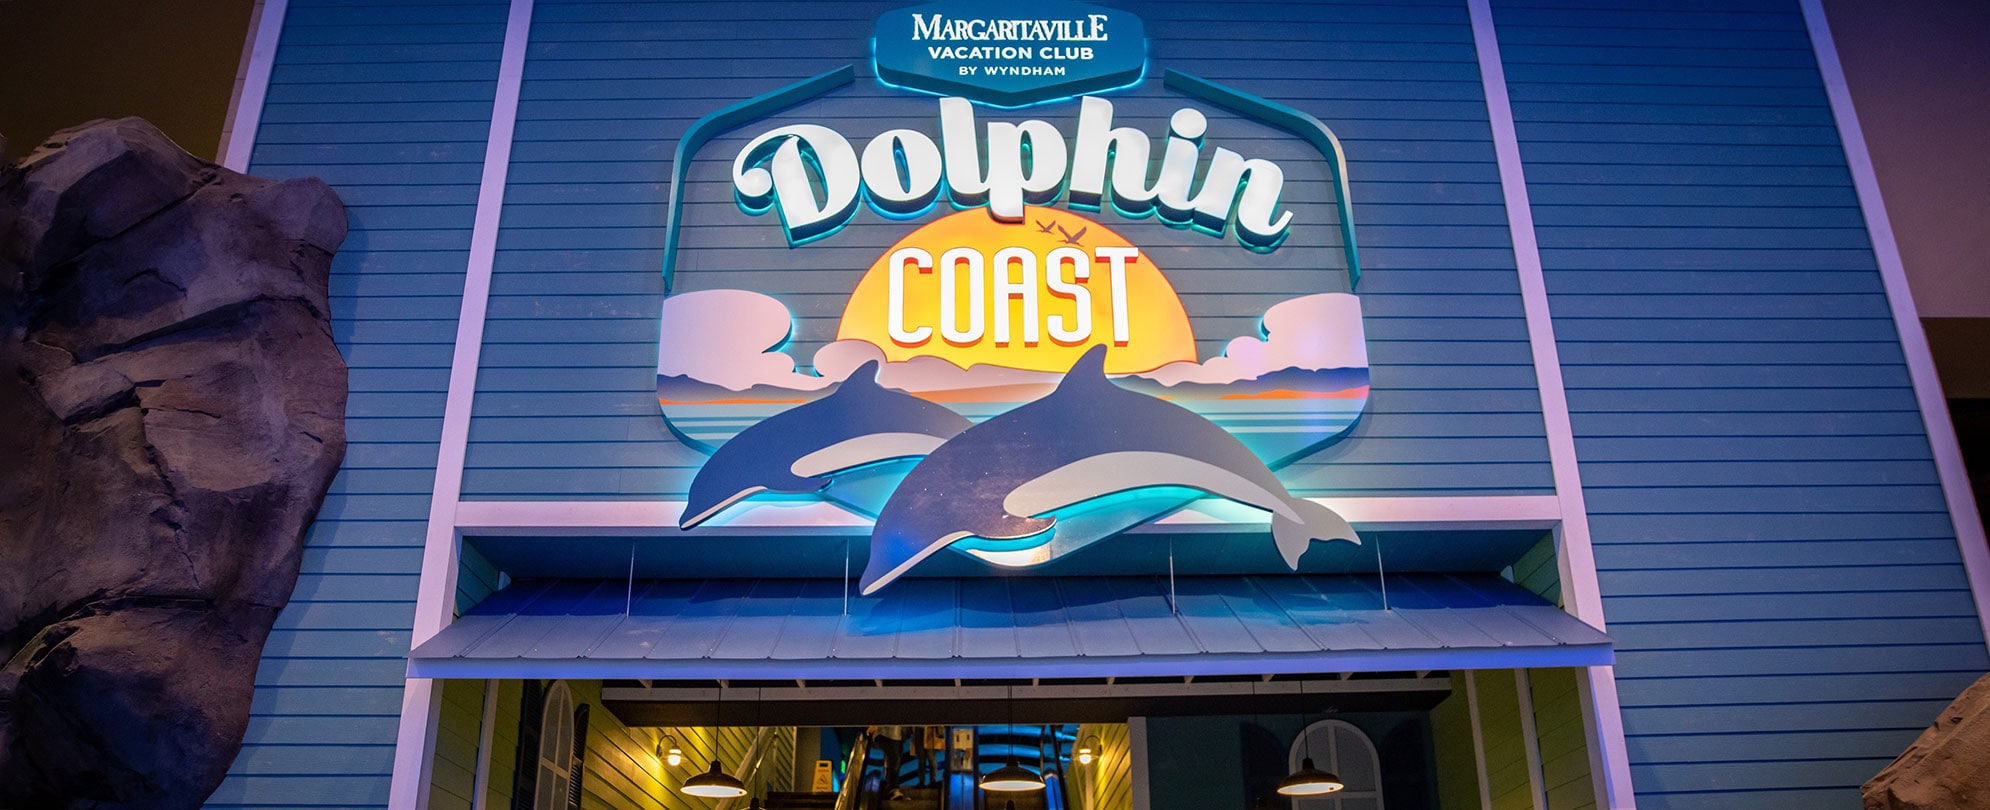 View of the Dolphin Coast Logo on a building